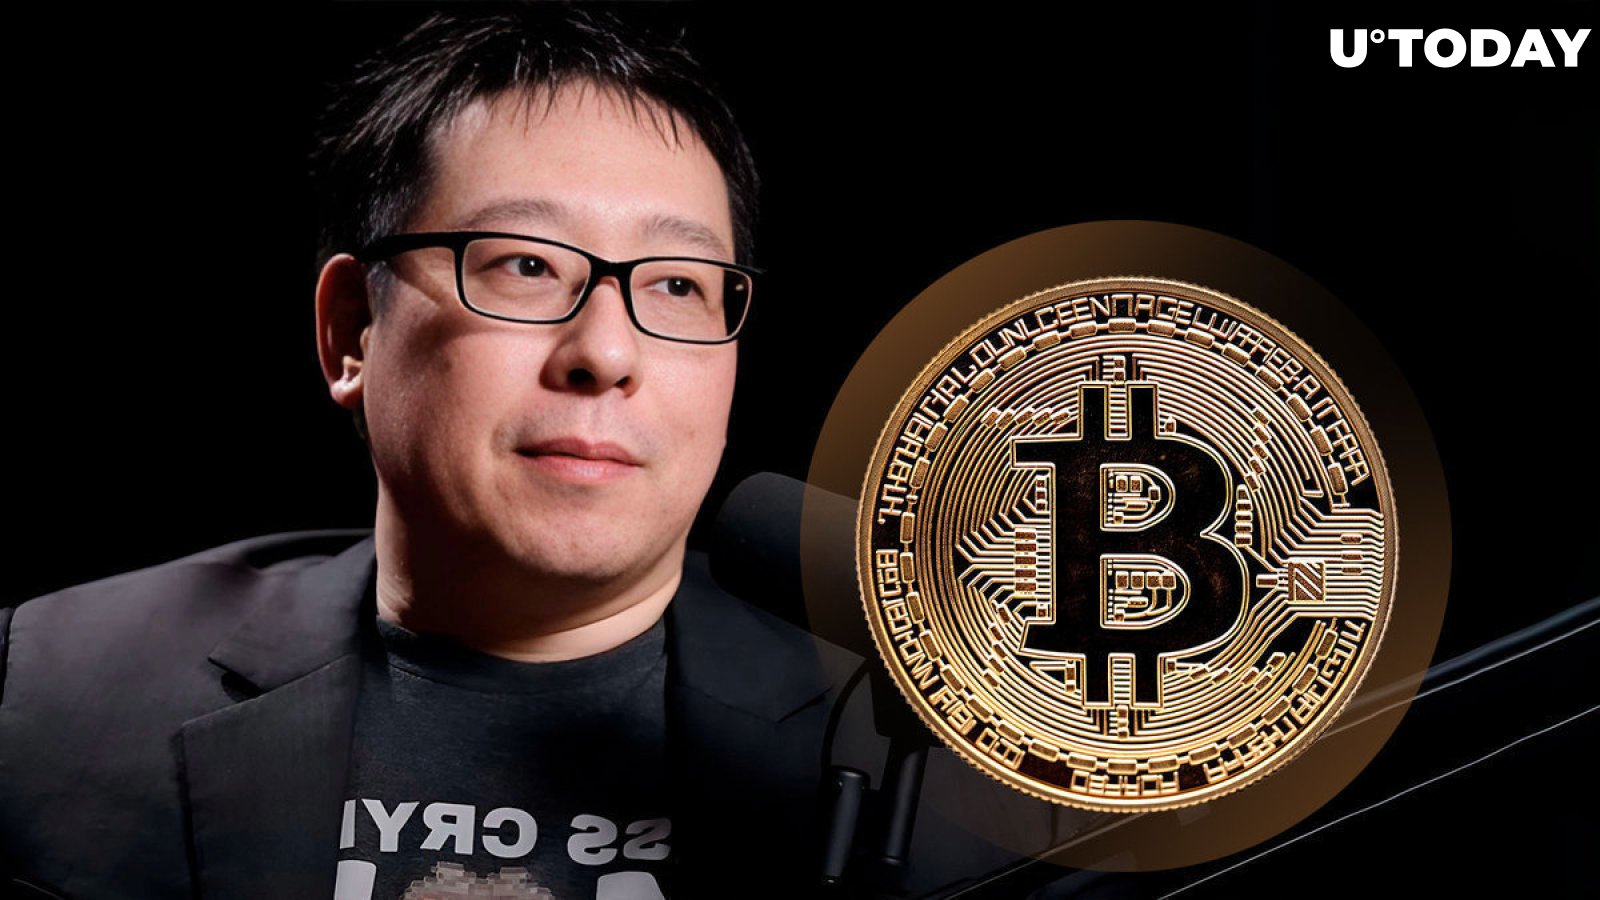 Bullish Bitcoin Statement Issued by Samson Mow: “Omega Coming”